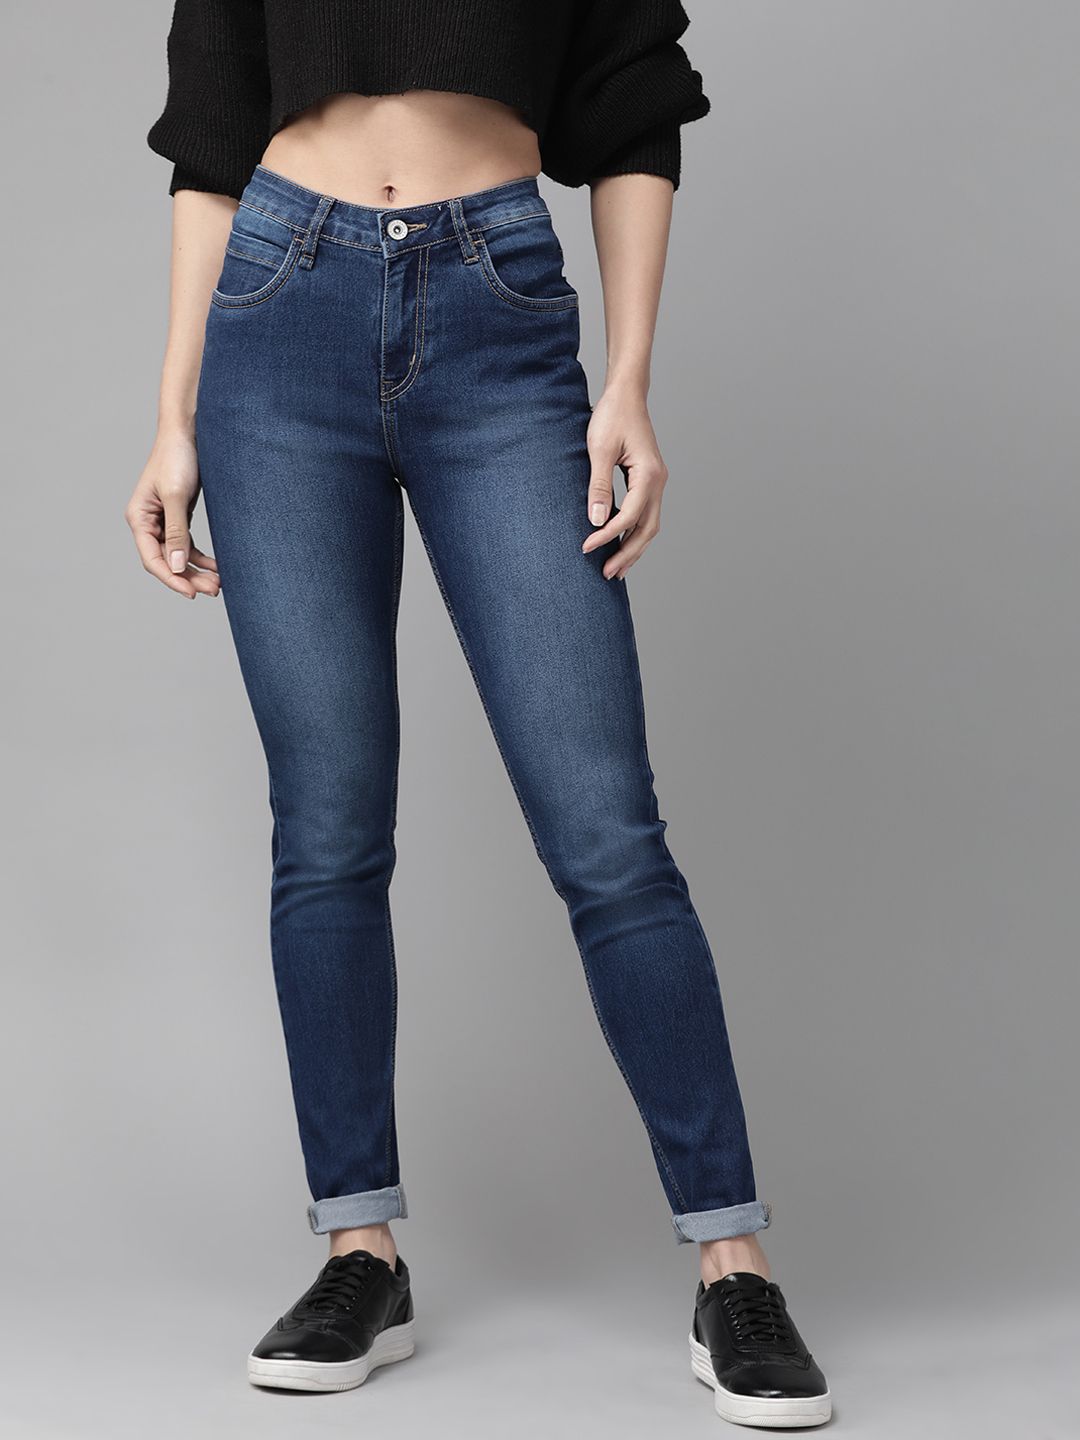 Roadster Women Navy Blue Skinny Fit Mid-Rise Clean Look Stretchable Jeans Price in India